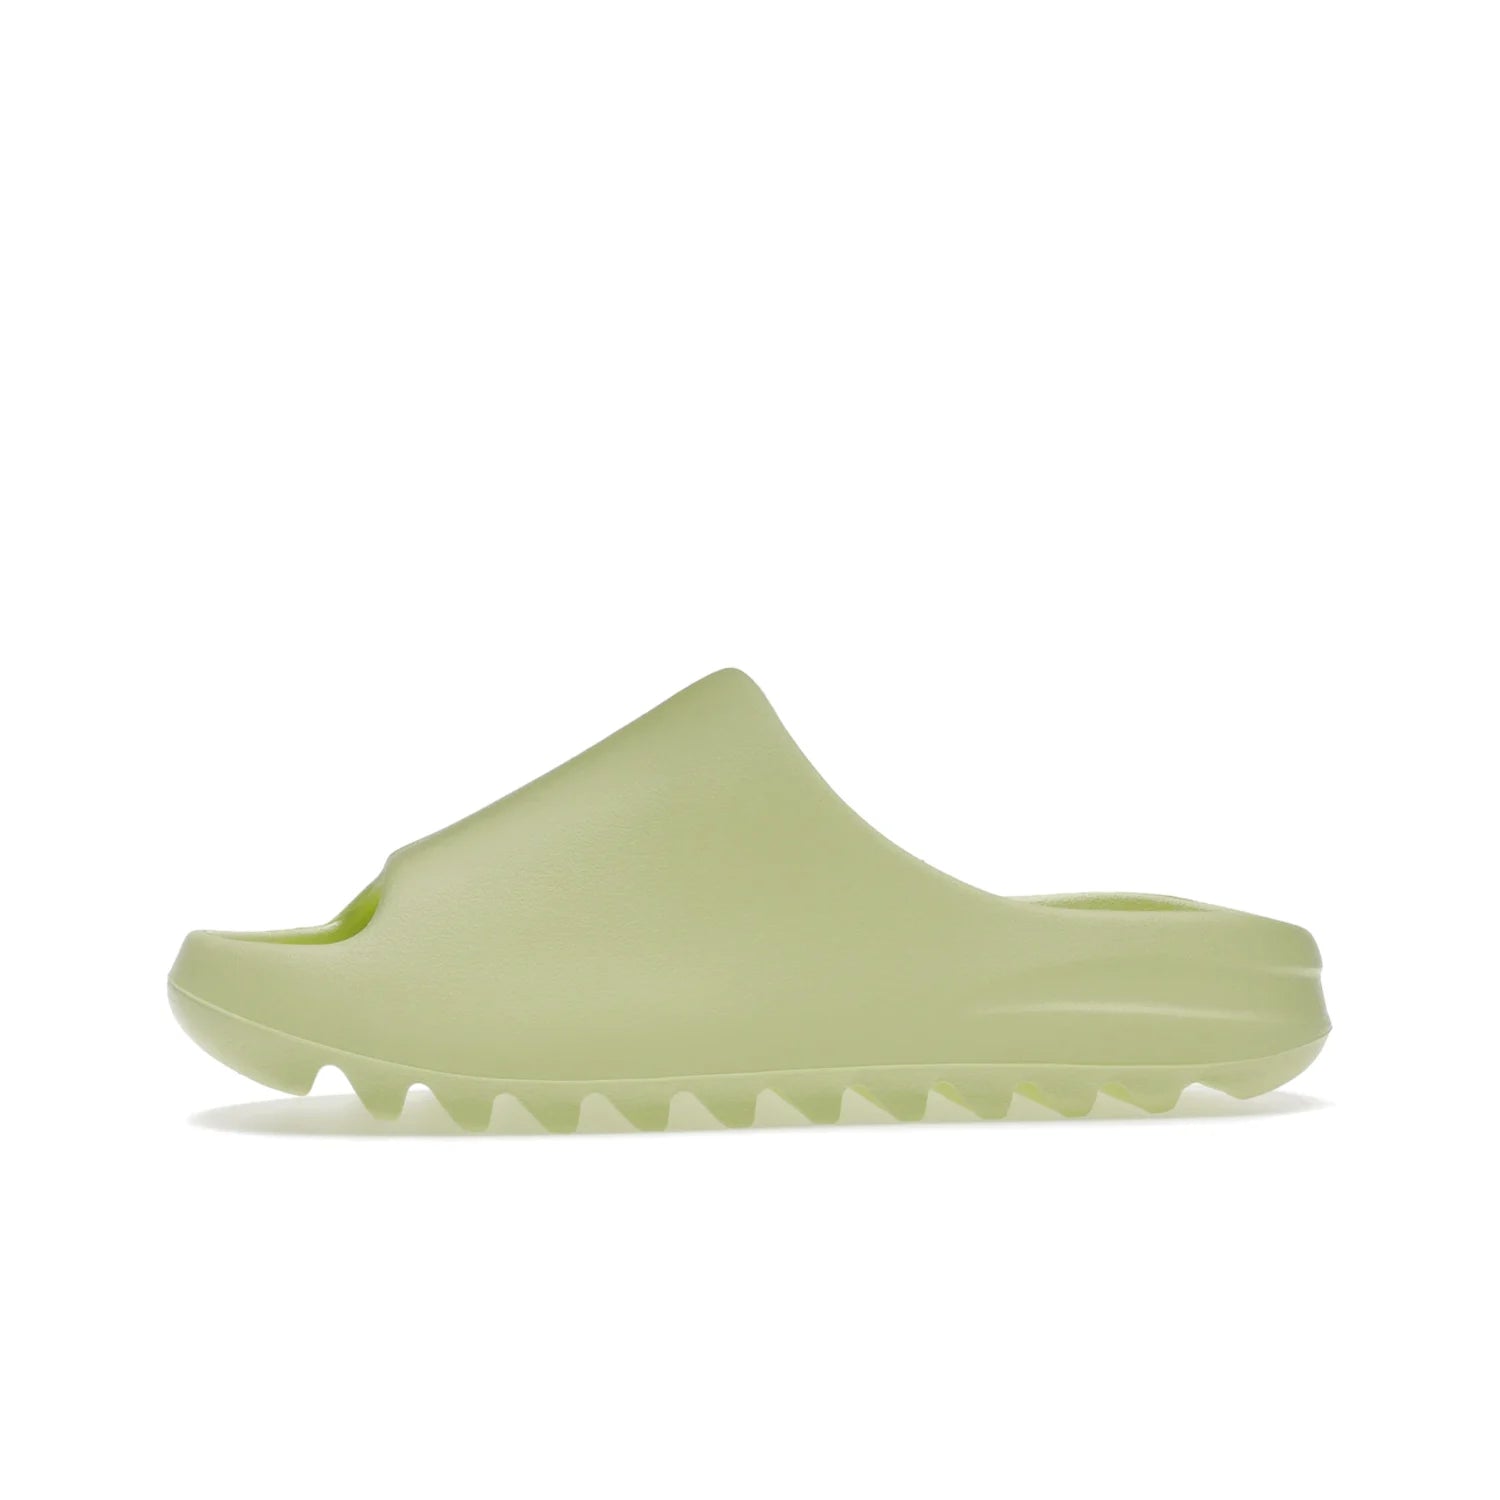 adidas Yeezy Slide Glow Green (2022) (Restock) - Image 18 - Only at www.BallersClubKickz.com - #
Introducing the Adidas Yeezy Slide Glow Green (2022) Restock. Offering ultimate comfort & responsive style with its grooved outsole. Grab your pair on May 2022 for an unforgettable addition to your sneaker collection. US and UK sizes the same.